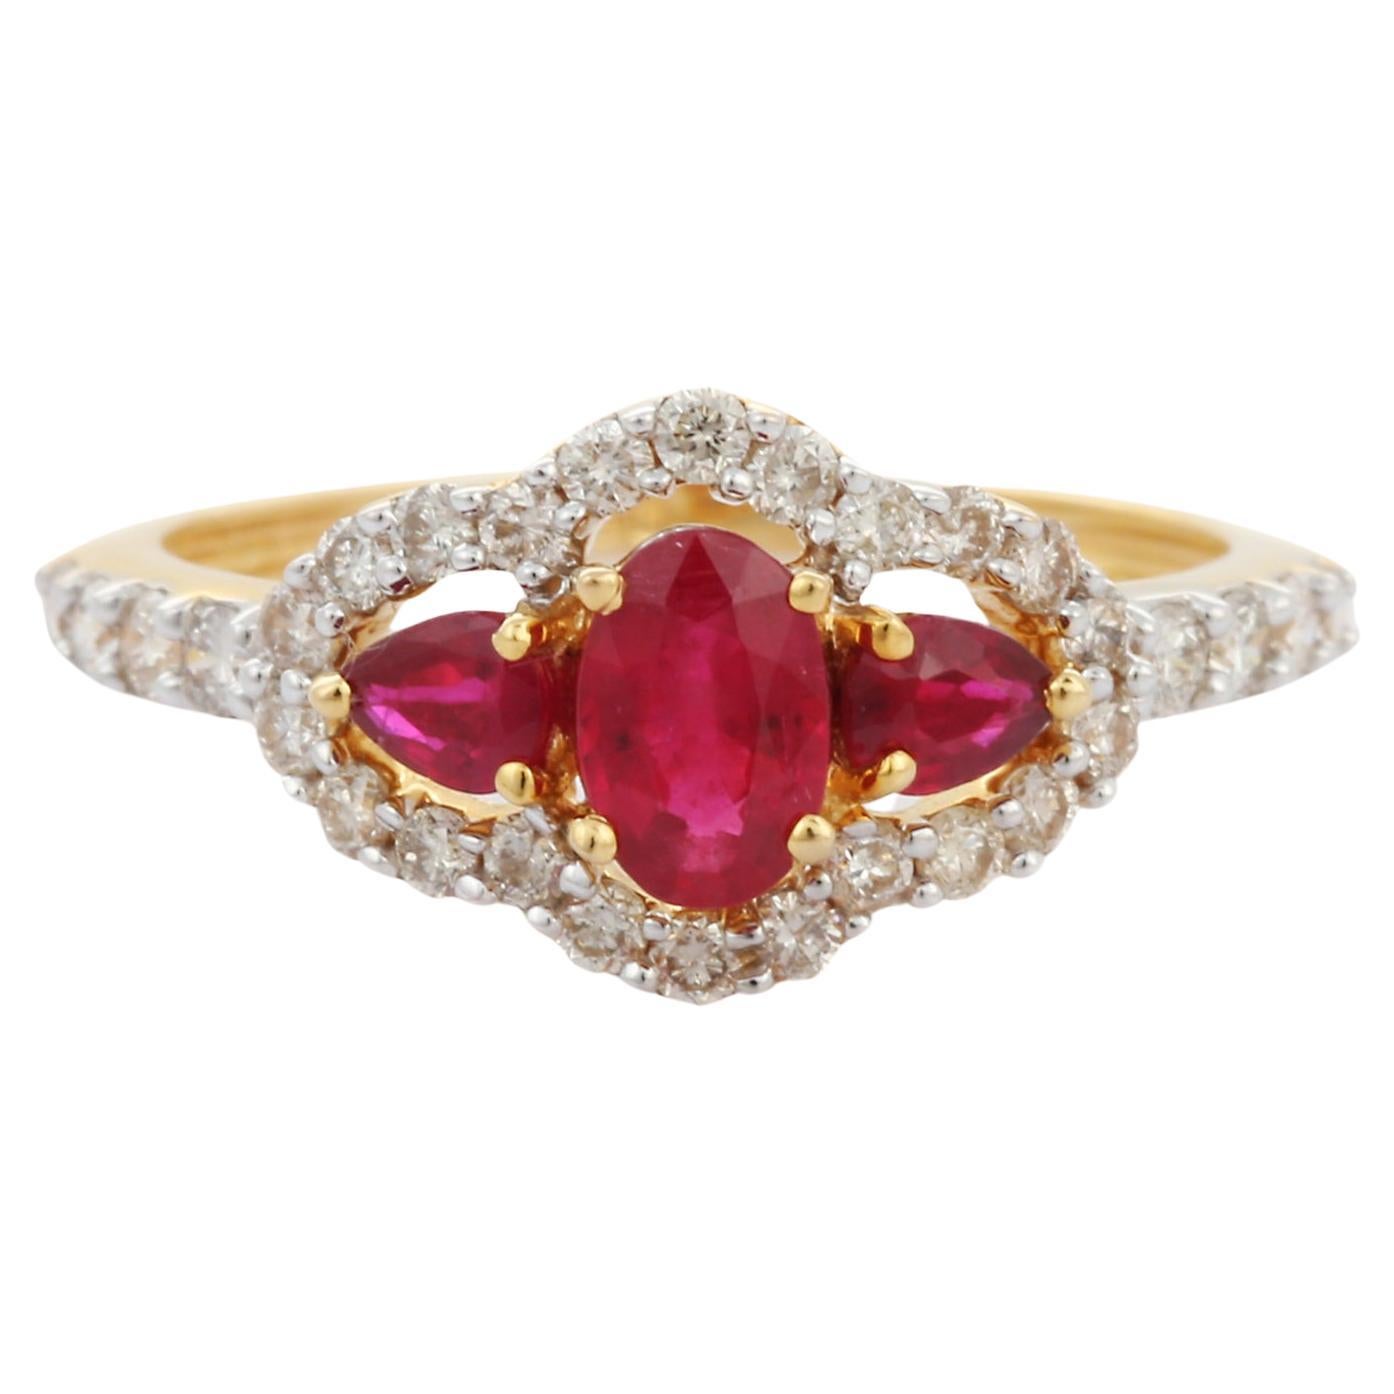 18K Yellow Gold Oval Cut Ruby Cluster Diamond Engagement Ring